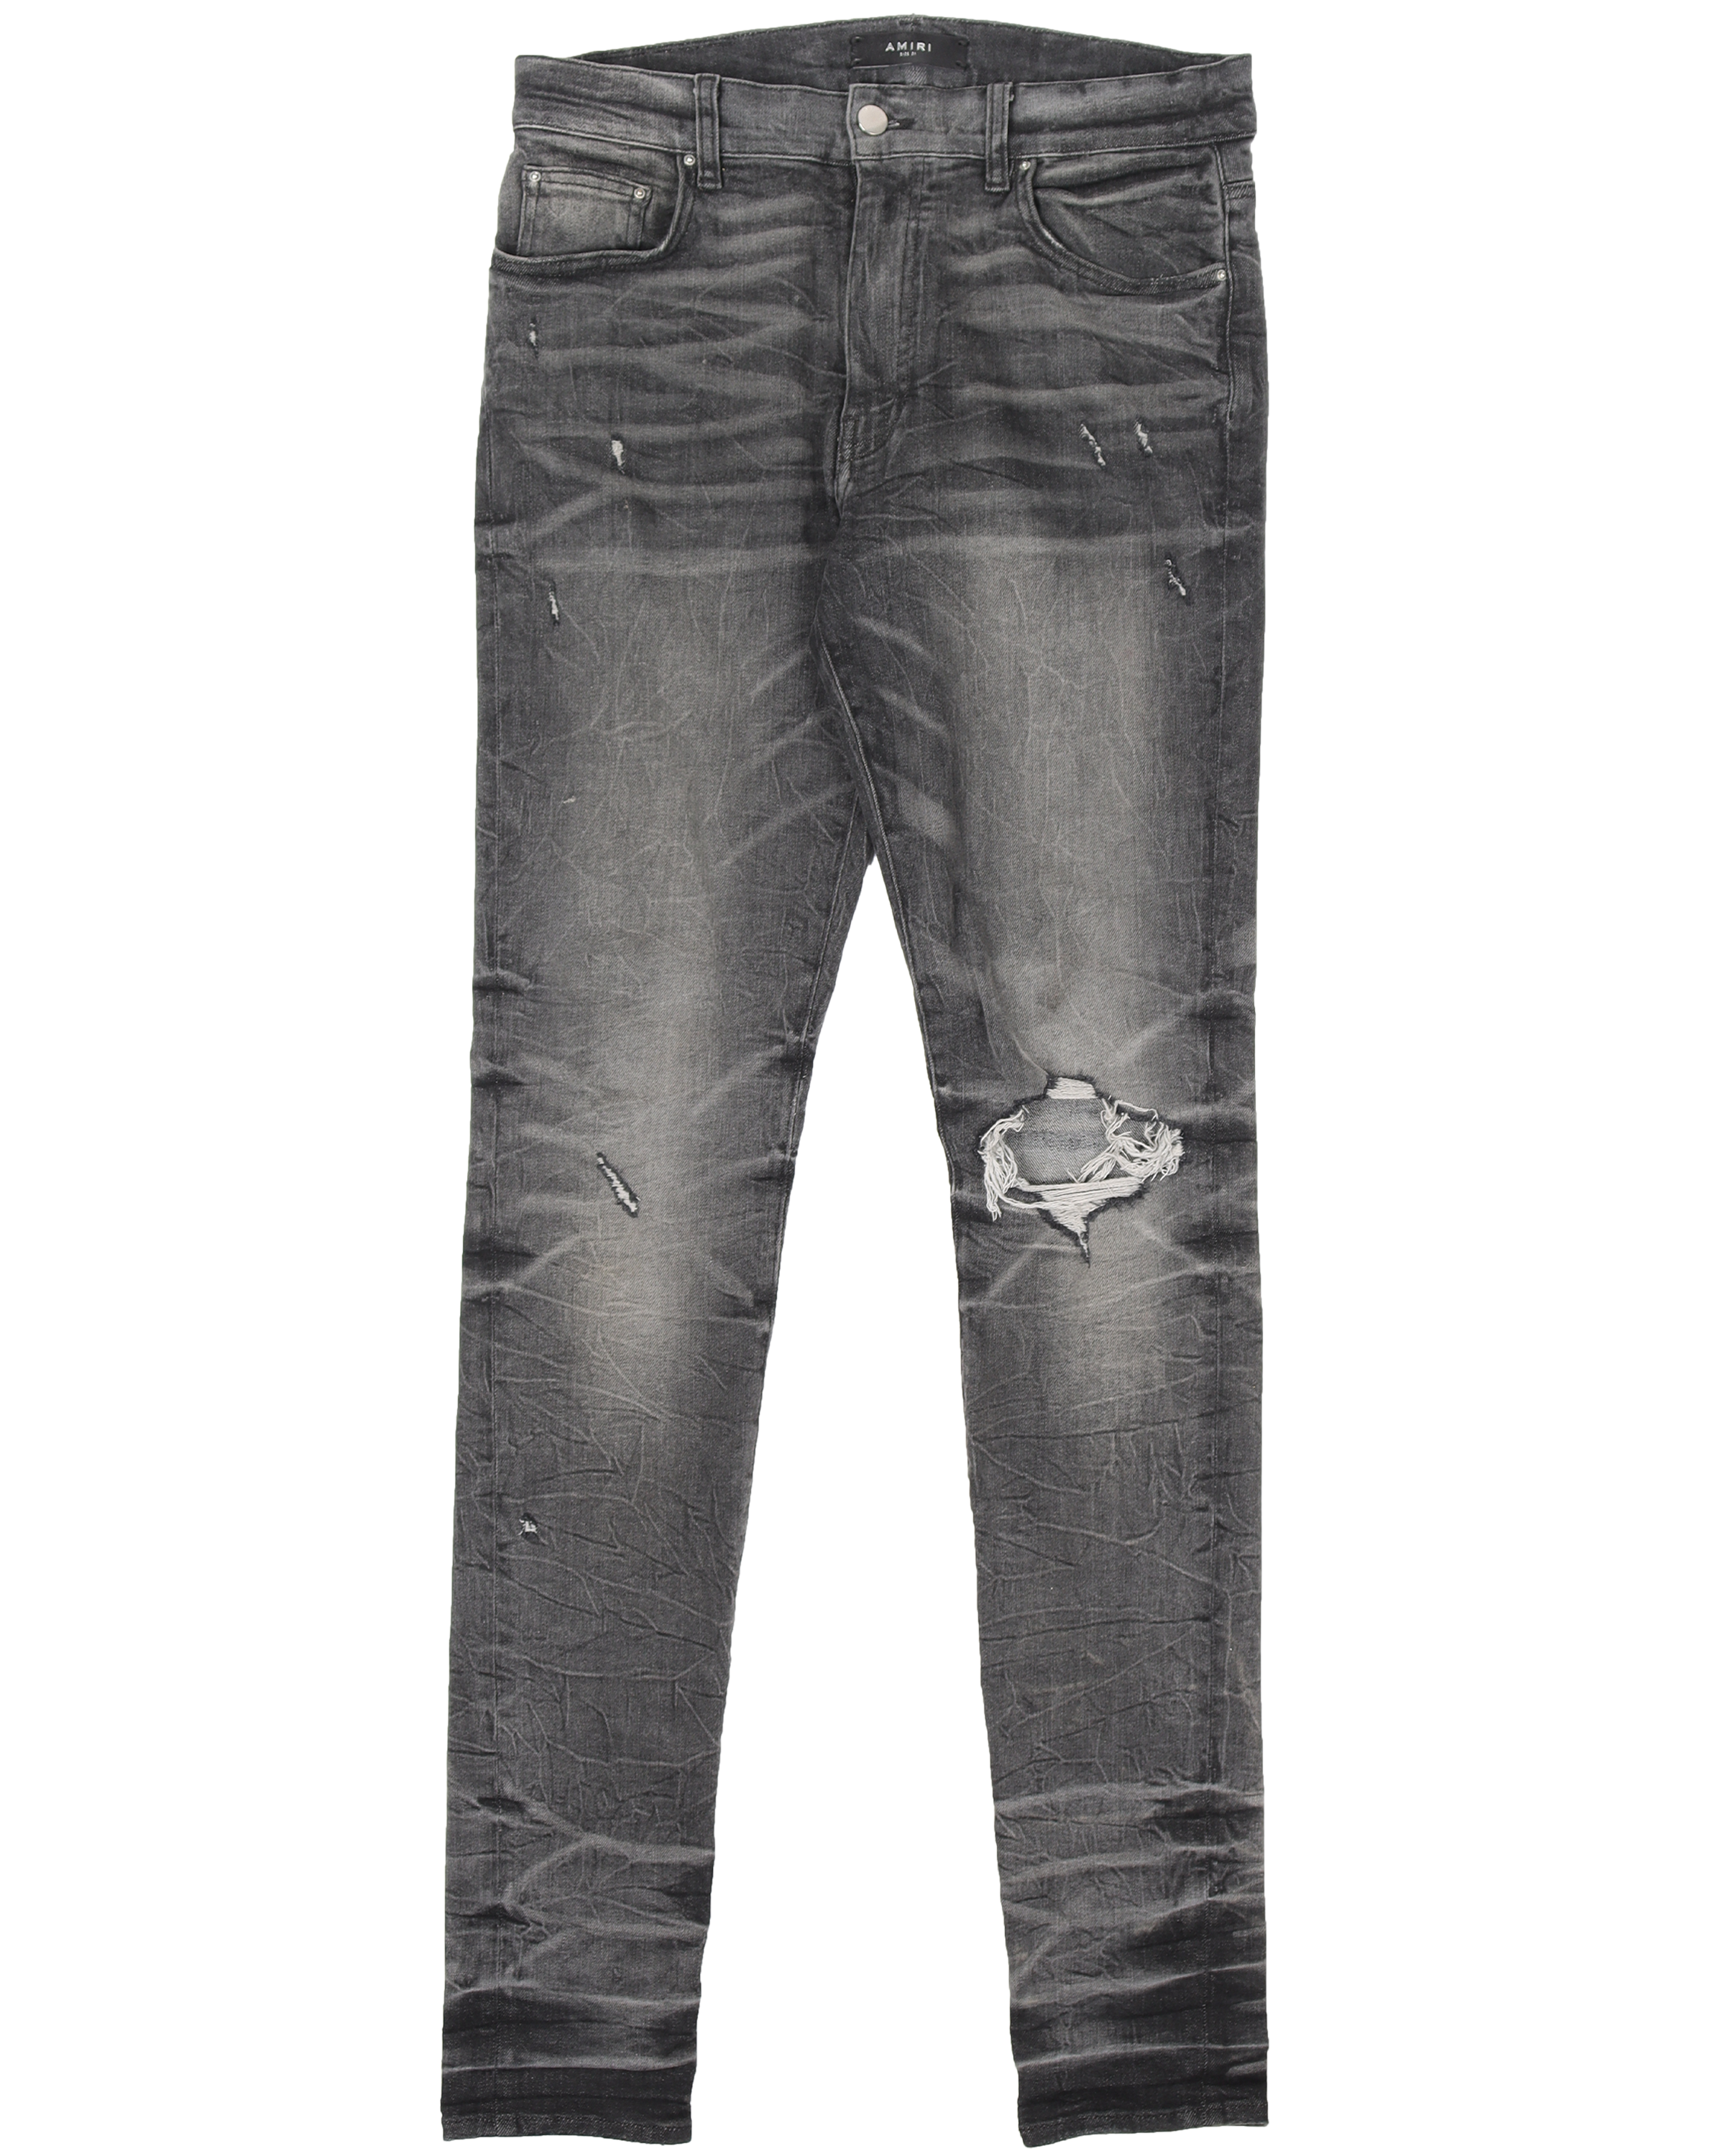 Knee Blowout Distressed Jeans